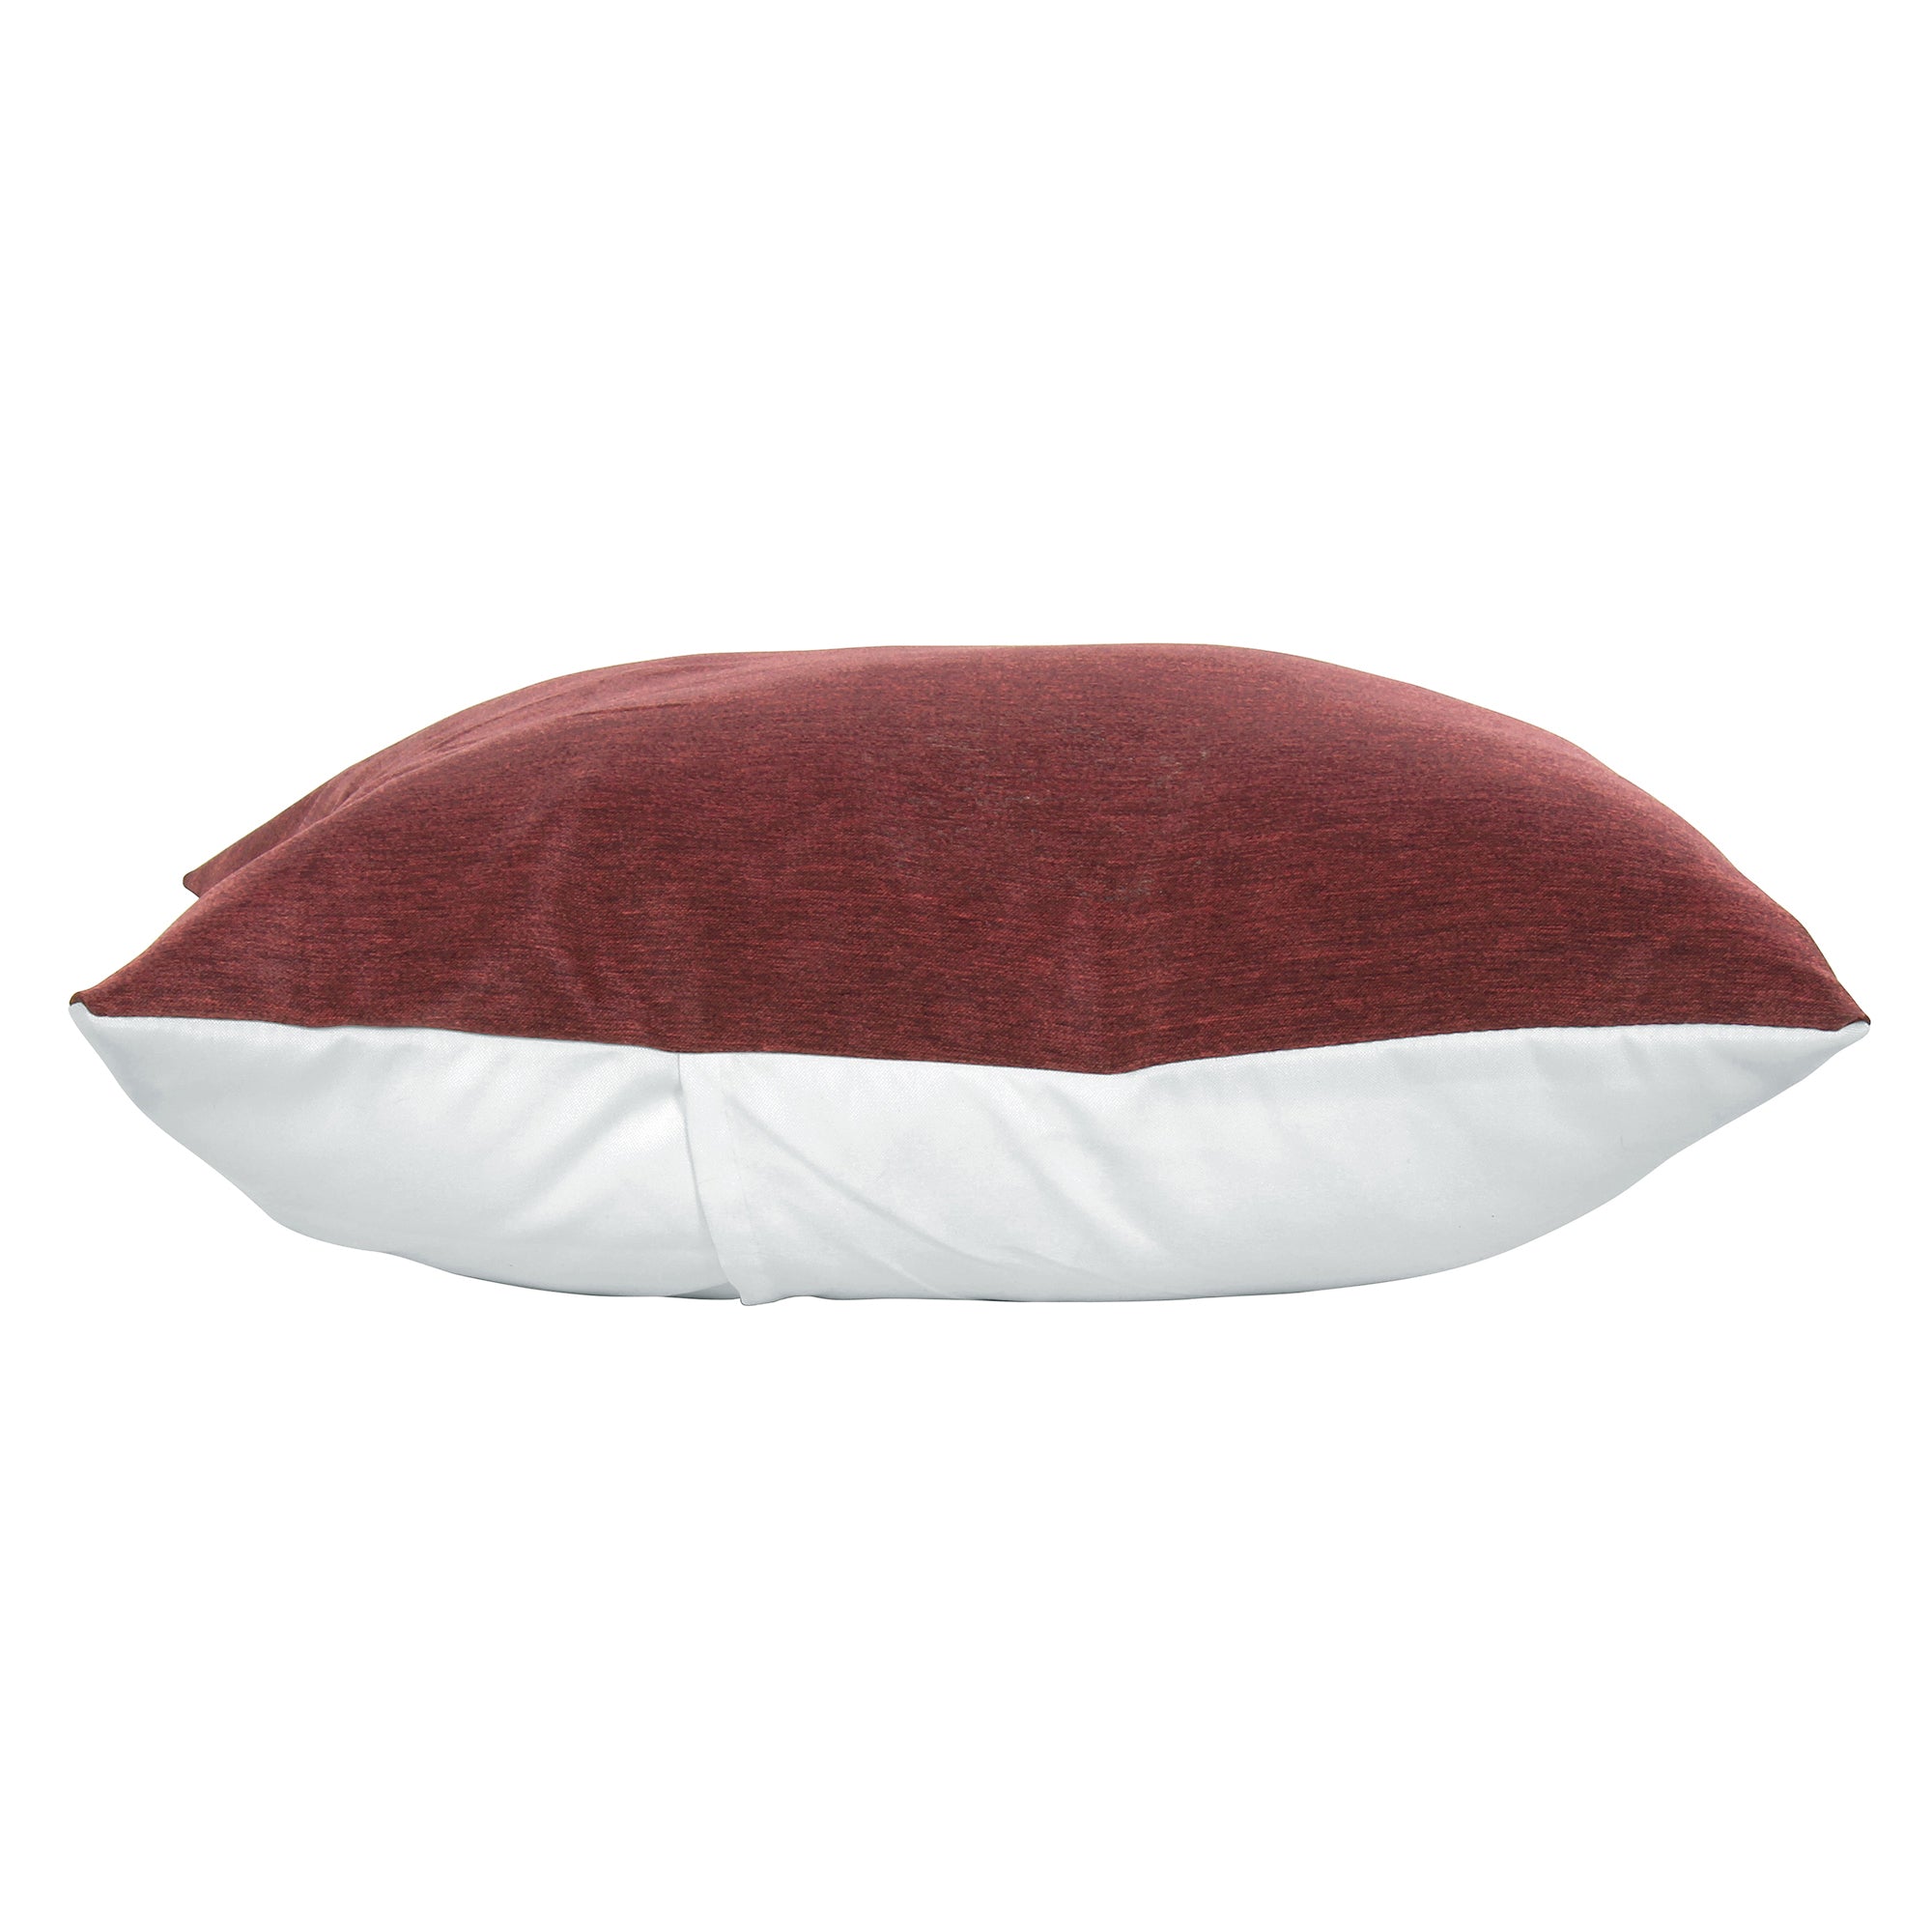 Story@Home Wine Plain Polyester 6 pcs of Alegra Cushion Covers